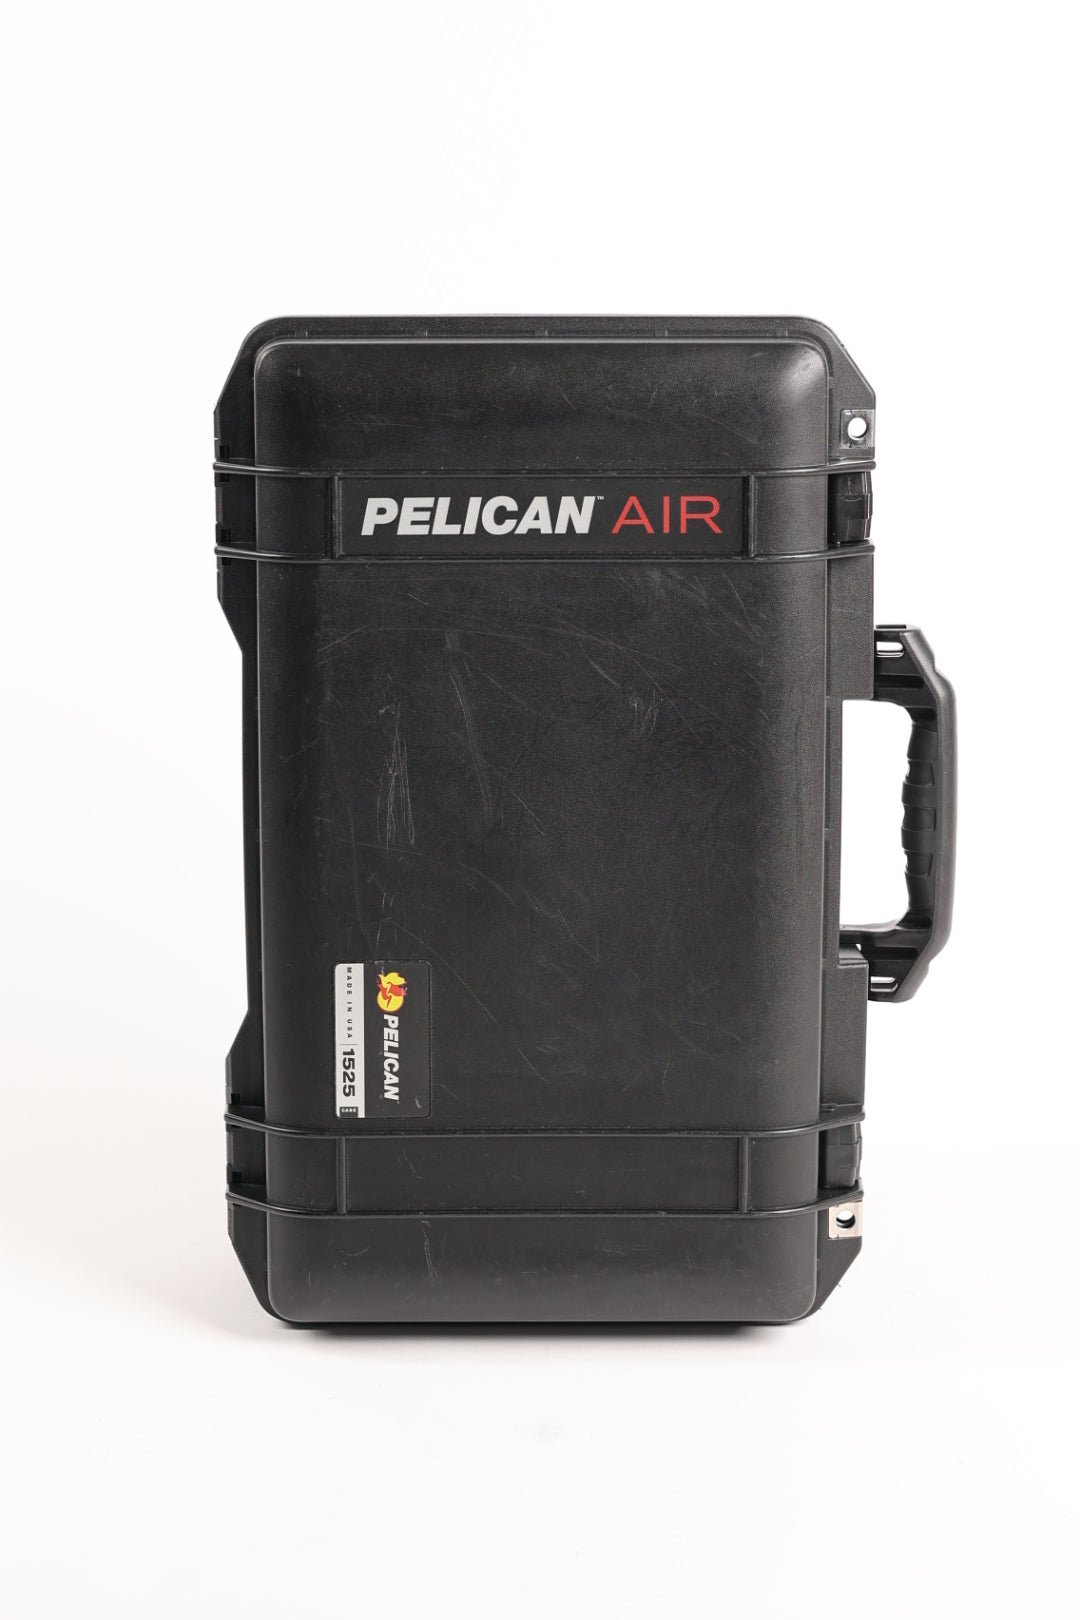 Pelican P1525 Hard Case w/air dividers, Used